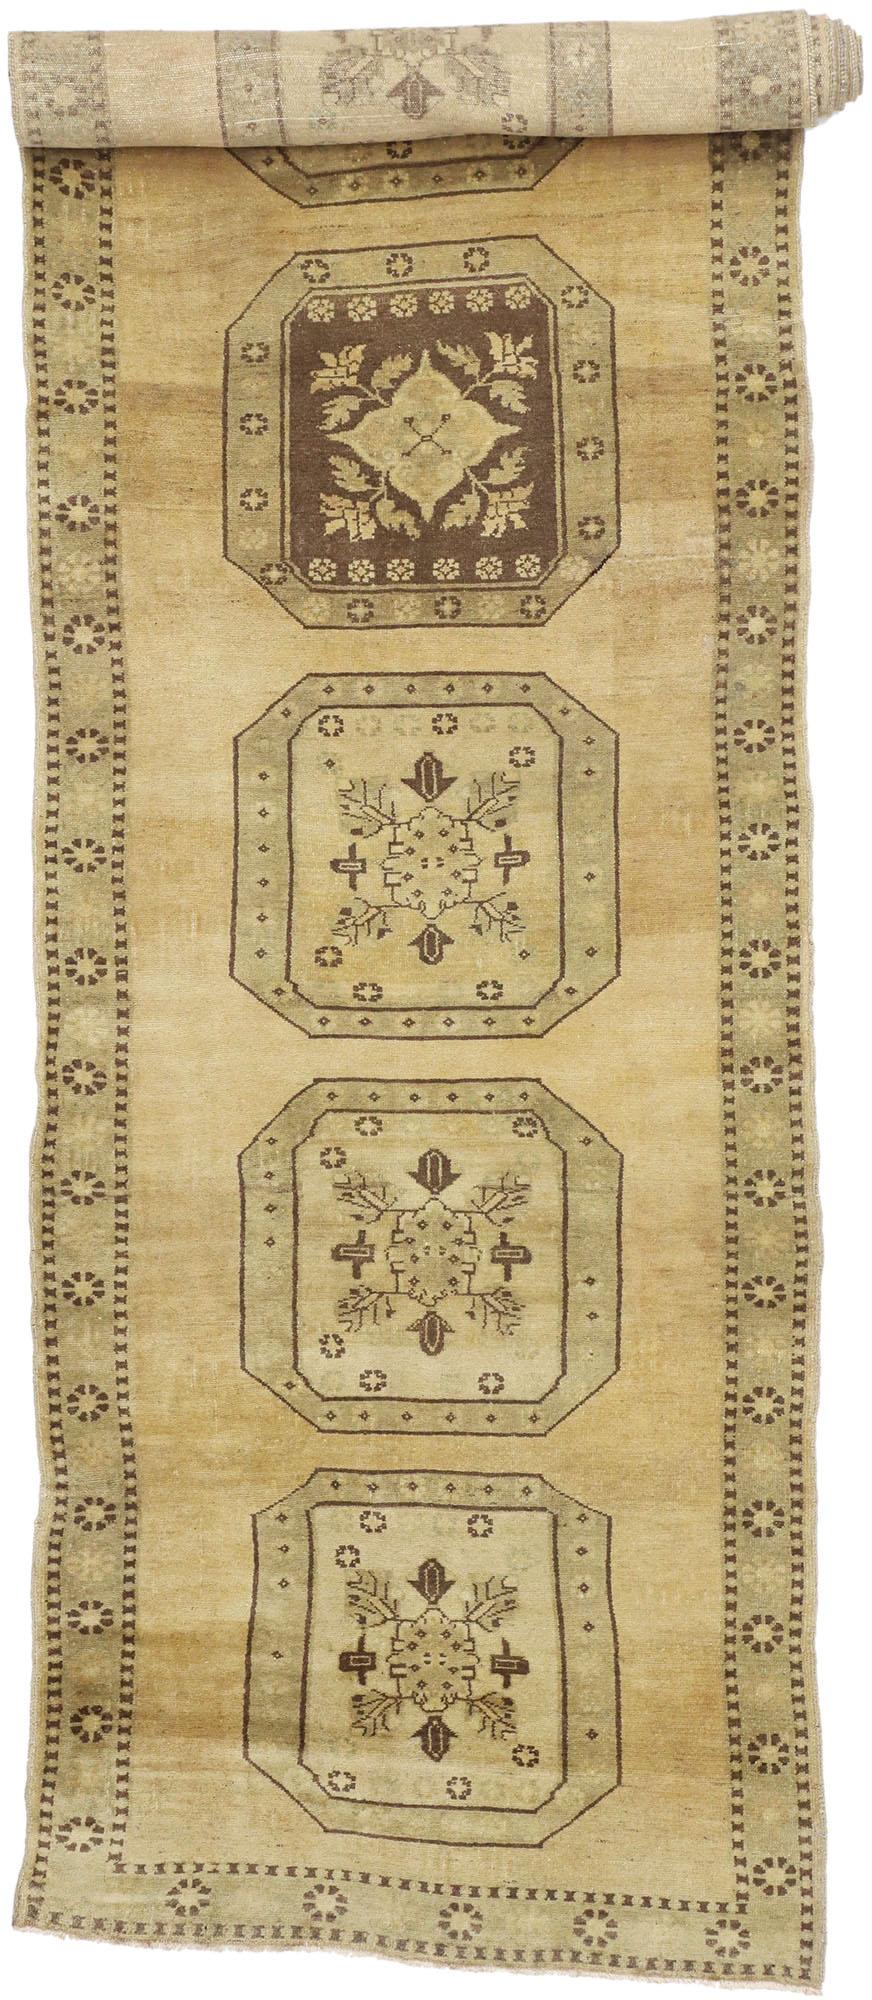 50146 Vintage Turkish Oushak Rug, 03’09 x 15’01. 
Bucolic charm meets imitable warmth in this vintage Turkish Oushak rug The delicate botanical design and golden earthy hues woven into this piece work together creating a luxurious yet modern look.